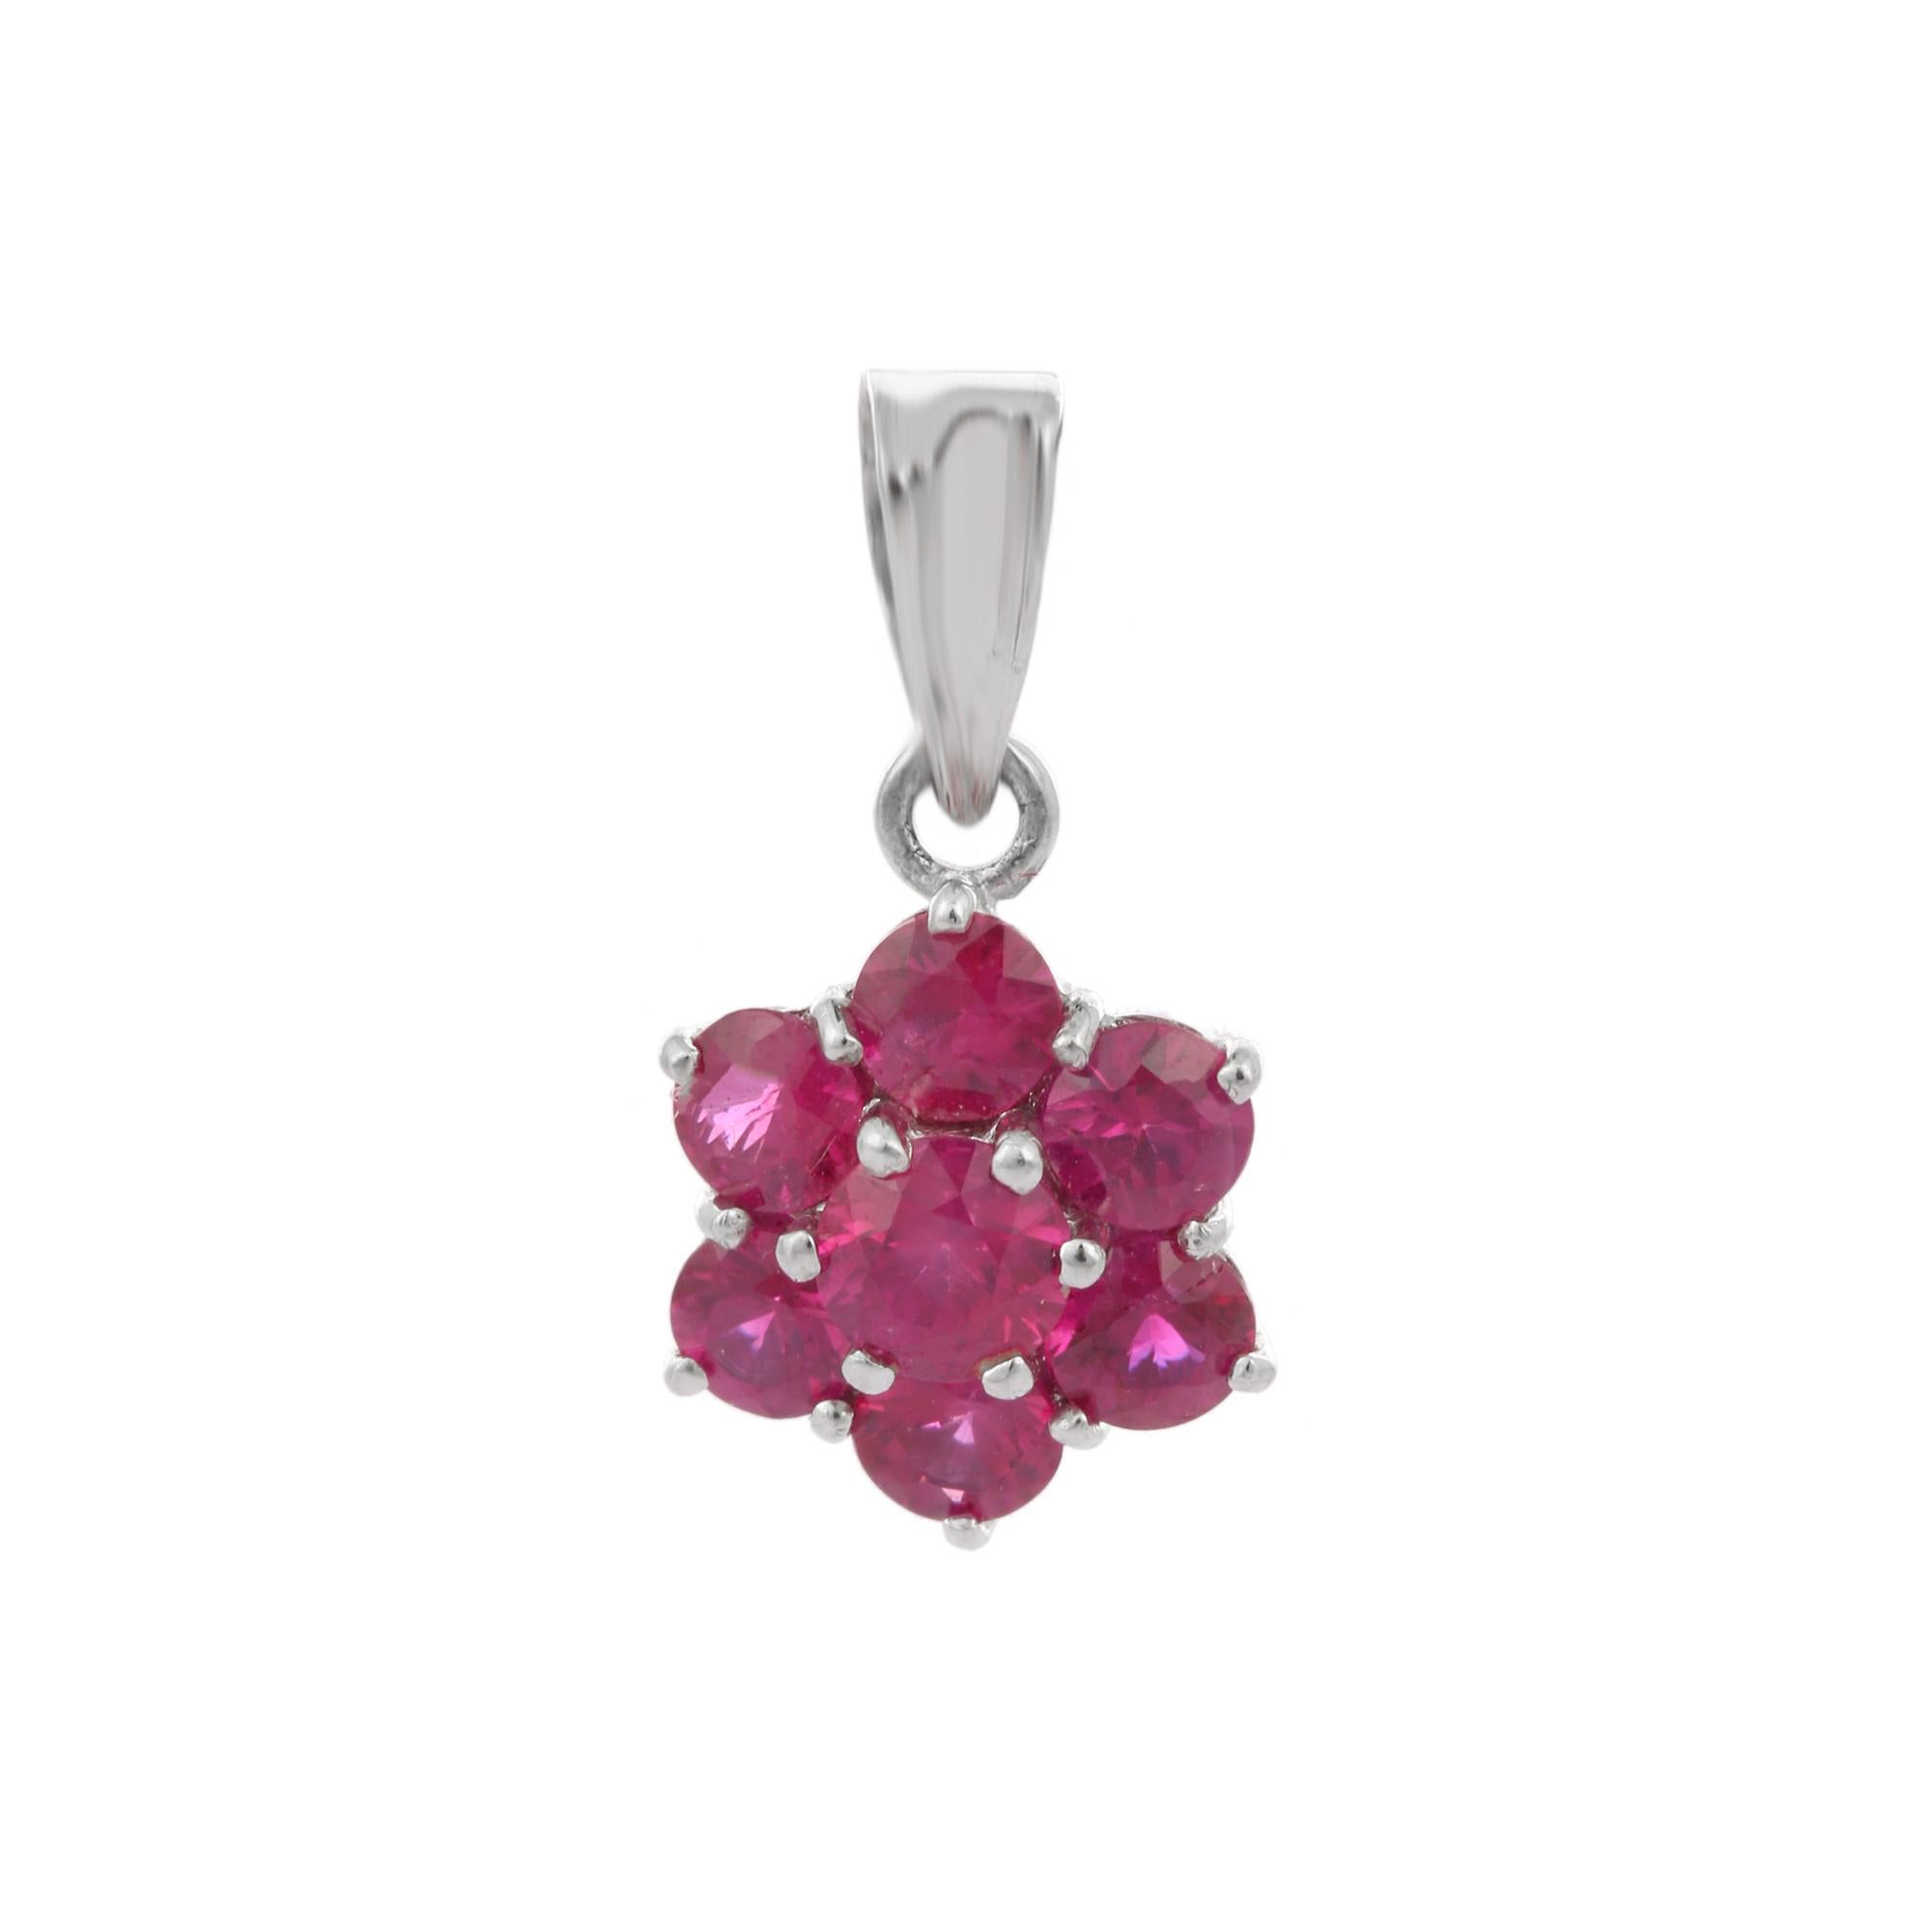 Round cut ruby flower pendant in 18K Gold. It has a round cut ruby that completes your look with a decent touch. Pendants are used to wear or gifted to represent love and promises. It's an attractive jewelry piece that goes with every basic outfit